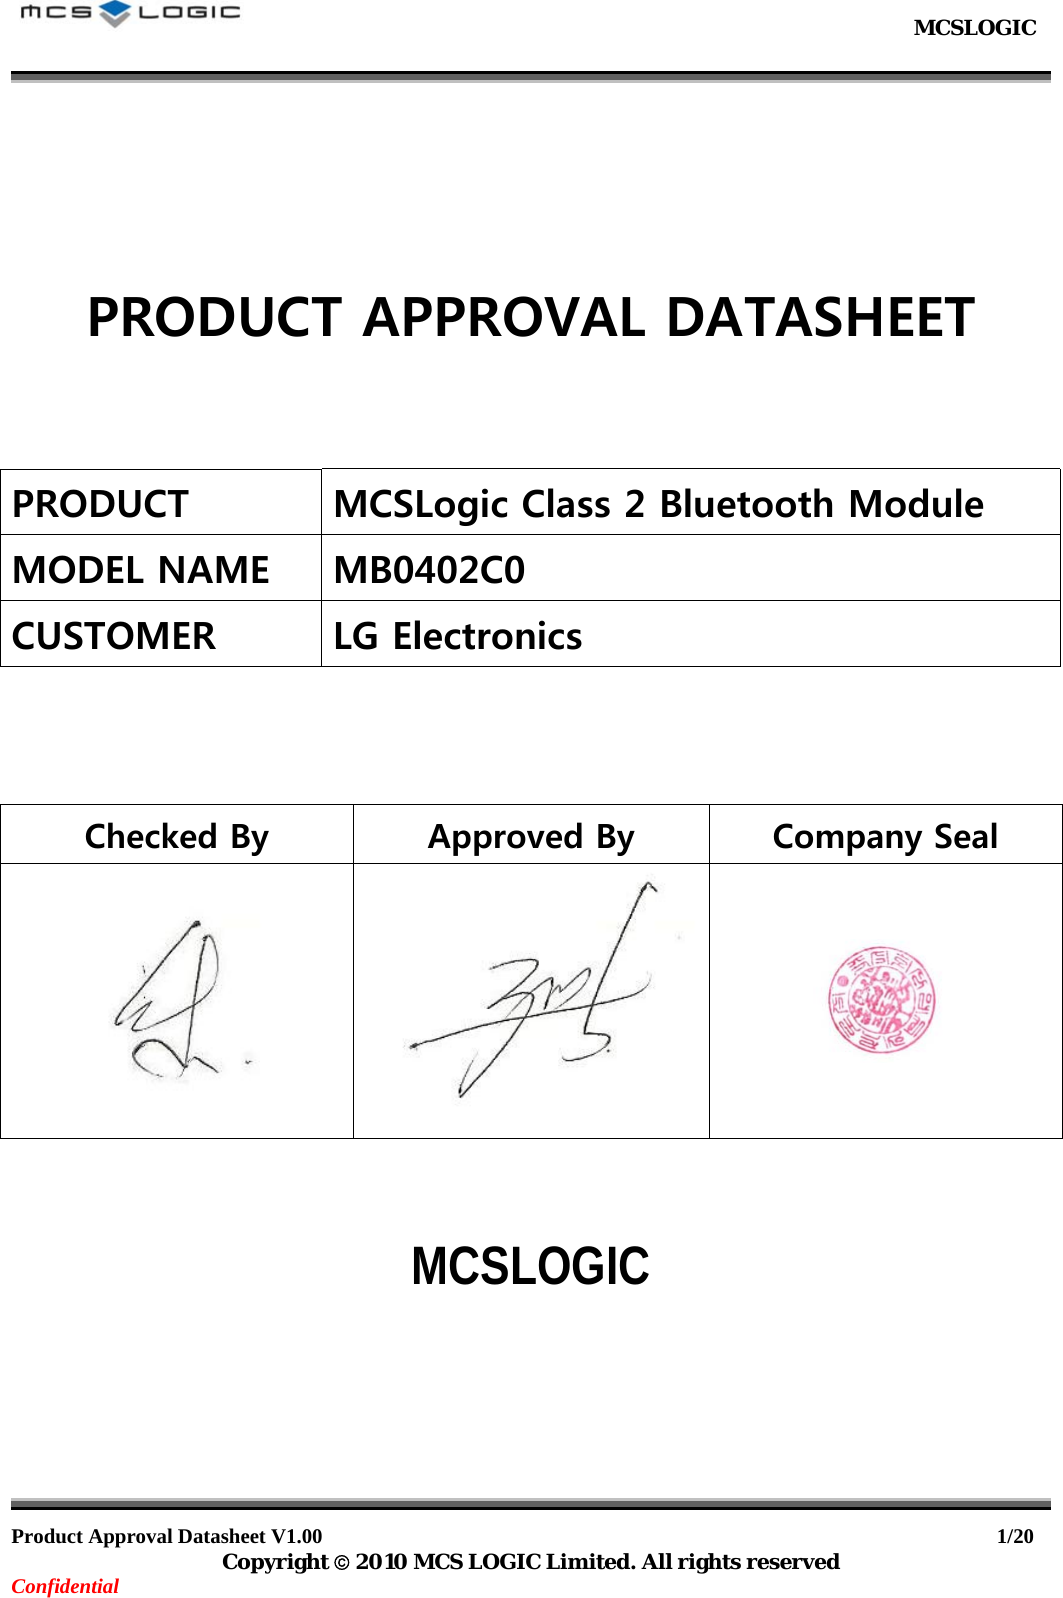                                                           MCSLOGIC                                                                                     Product Approval Datasheet V1.00                                                                  1/20 Copyright © 2010 MCS LOGIC Limited. All rights reserved Confidential       PRODUCT APPROVAL DATASHEET    PRODUCT MCSLogic Class 2 Bluetooth Module MODEL NAME MB0402C0 CUSTOMER LG Electronics    Checked By  Approved By  Company Seal        MCSLOGIC        